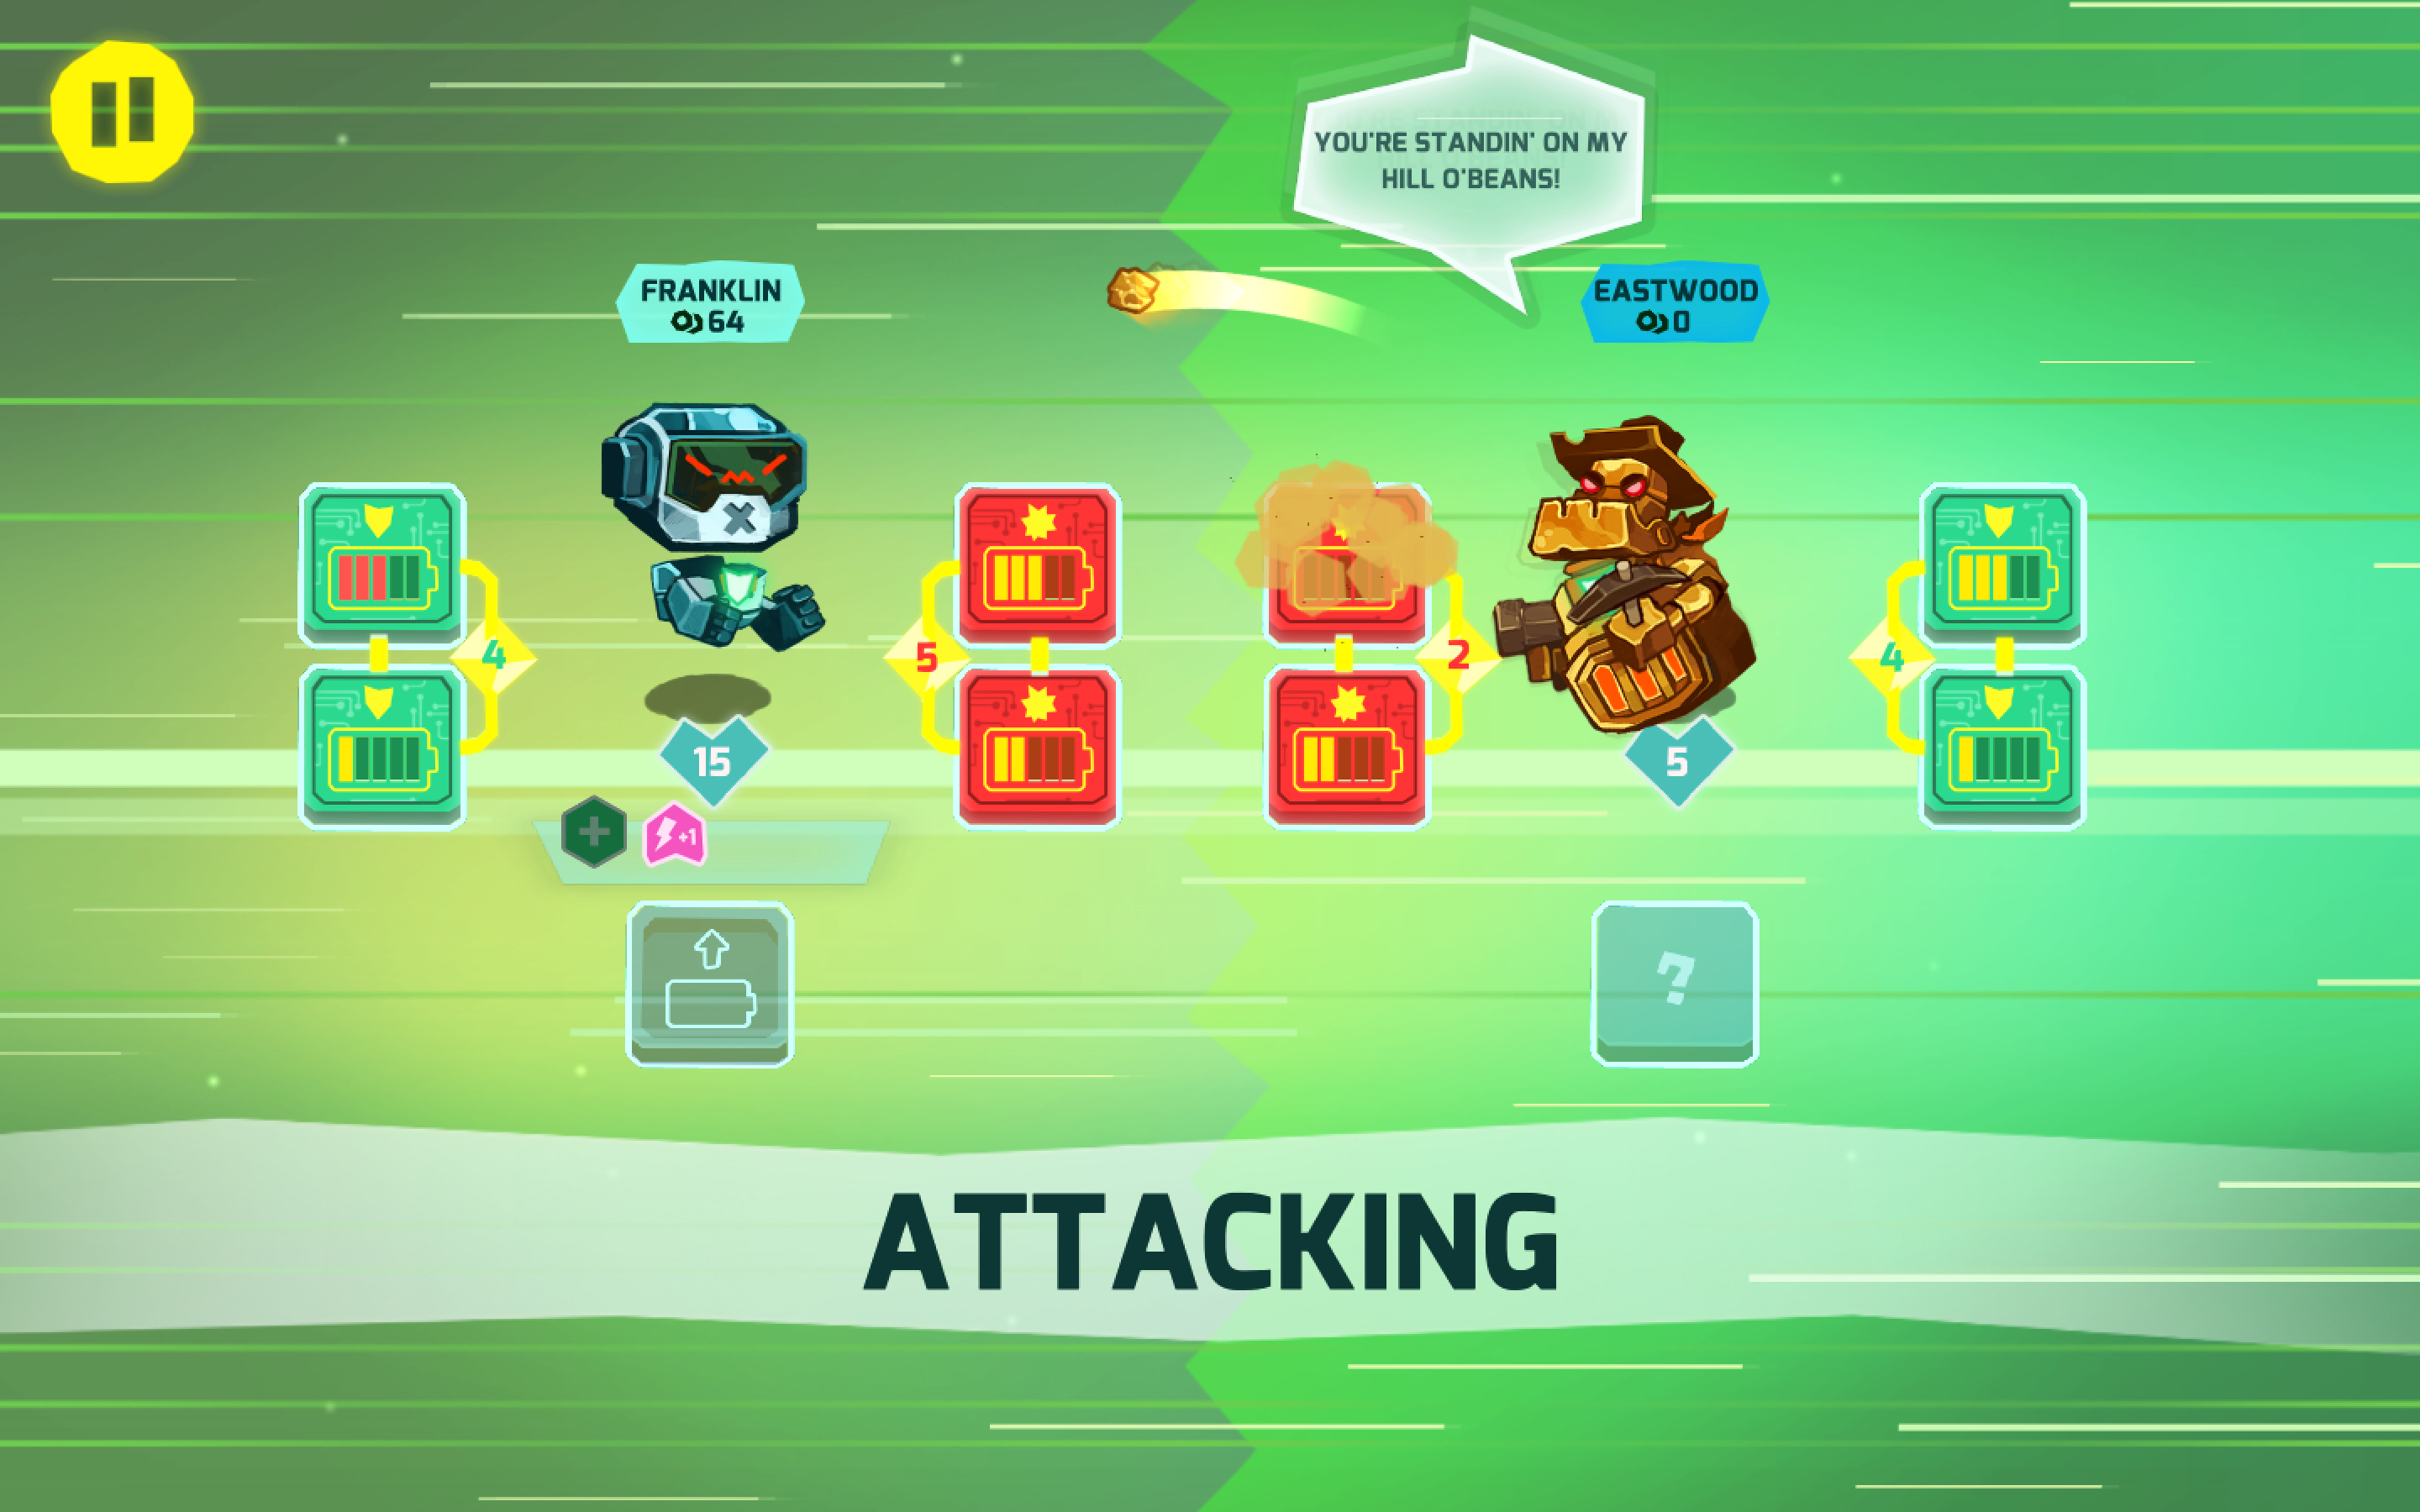 Console version of the game, with one cartoon robot facing off against another. Digital cards surround each opponent. A banner at the bottom of the screen announces this is the 'attacking' phase.